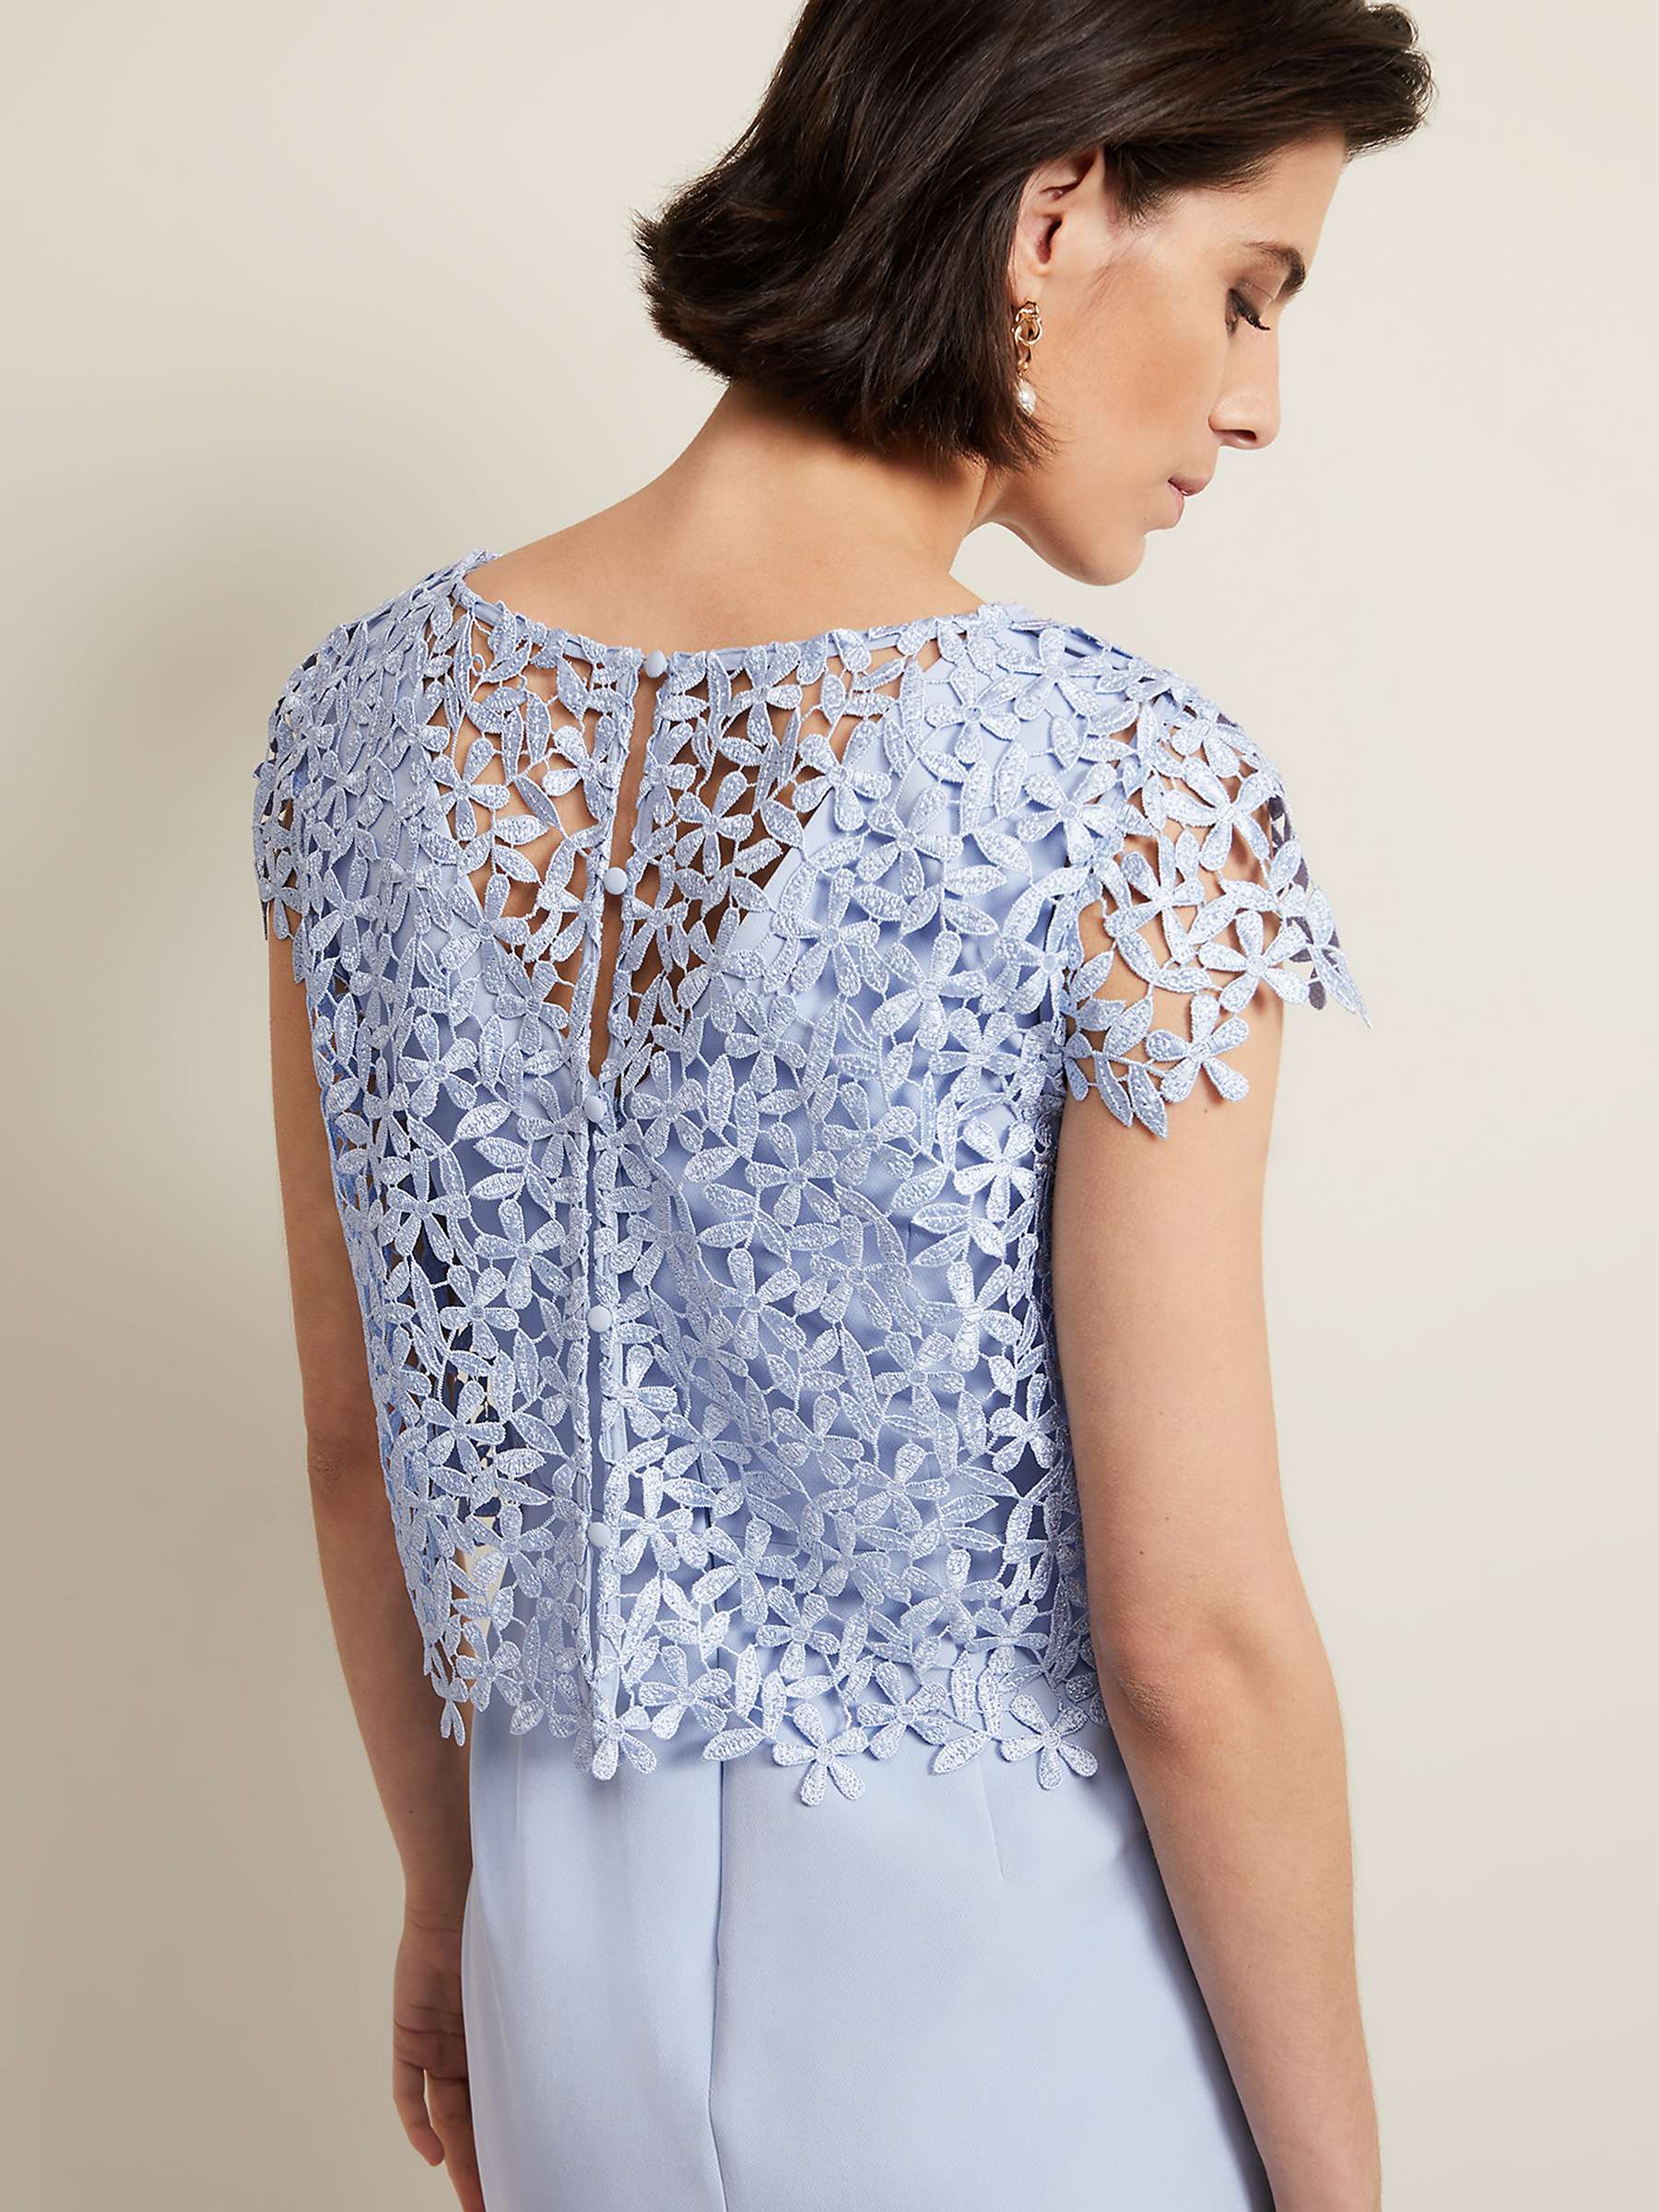 Buy Phase Eight Daisy Textured Bodice Dress Online at johnlewis.com